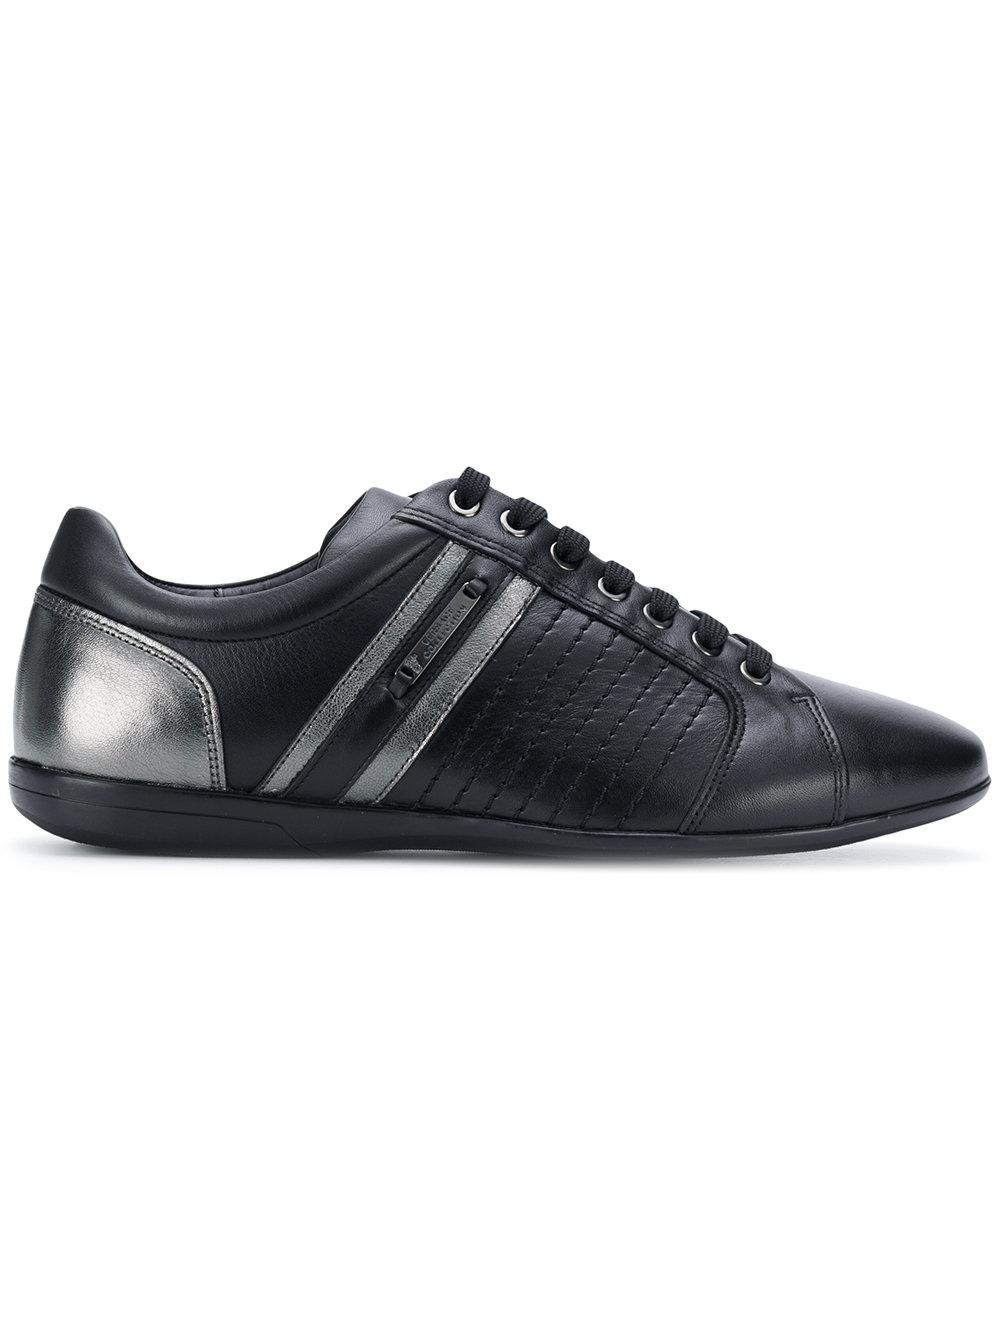 Versace Leather Logo Calf Shoes in Black for Men - Lyst